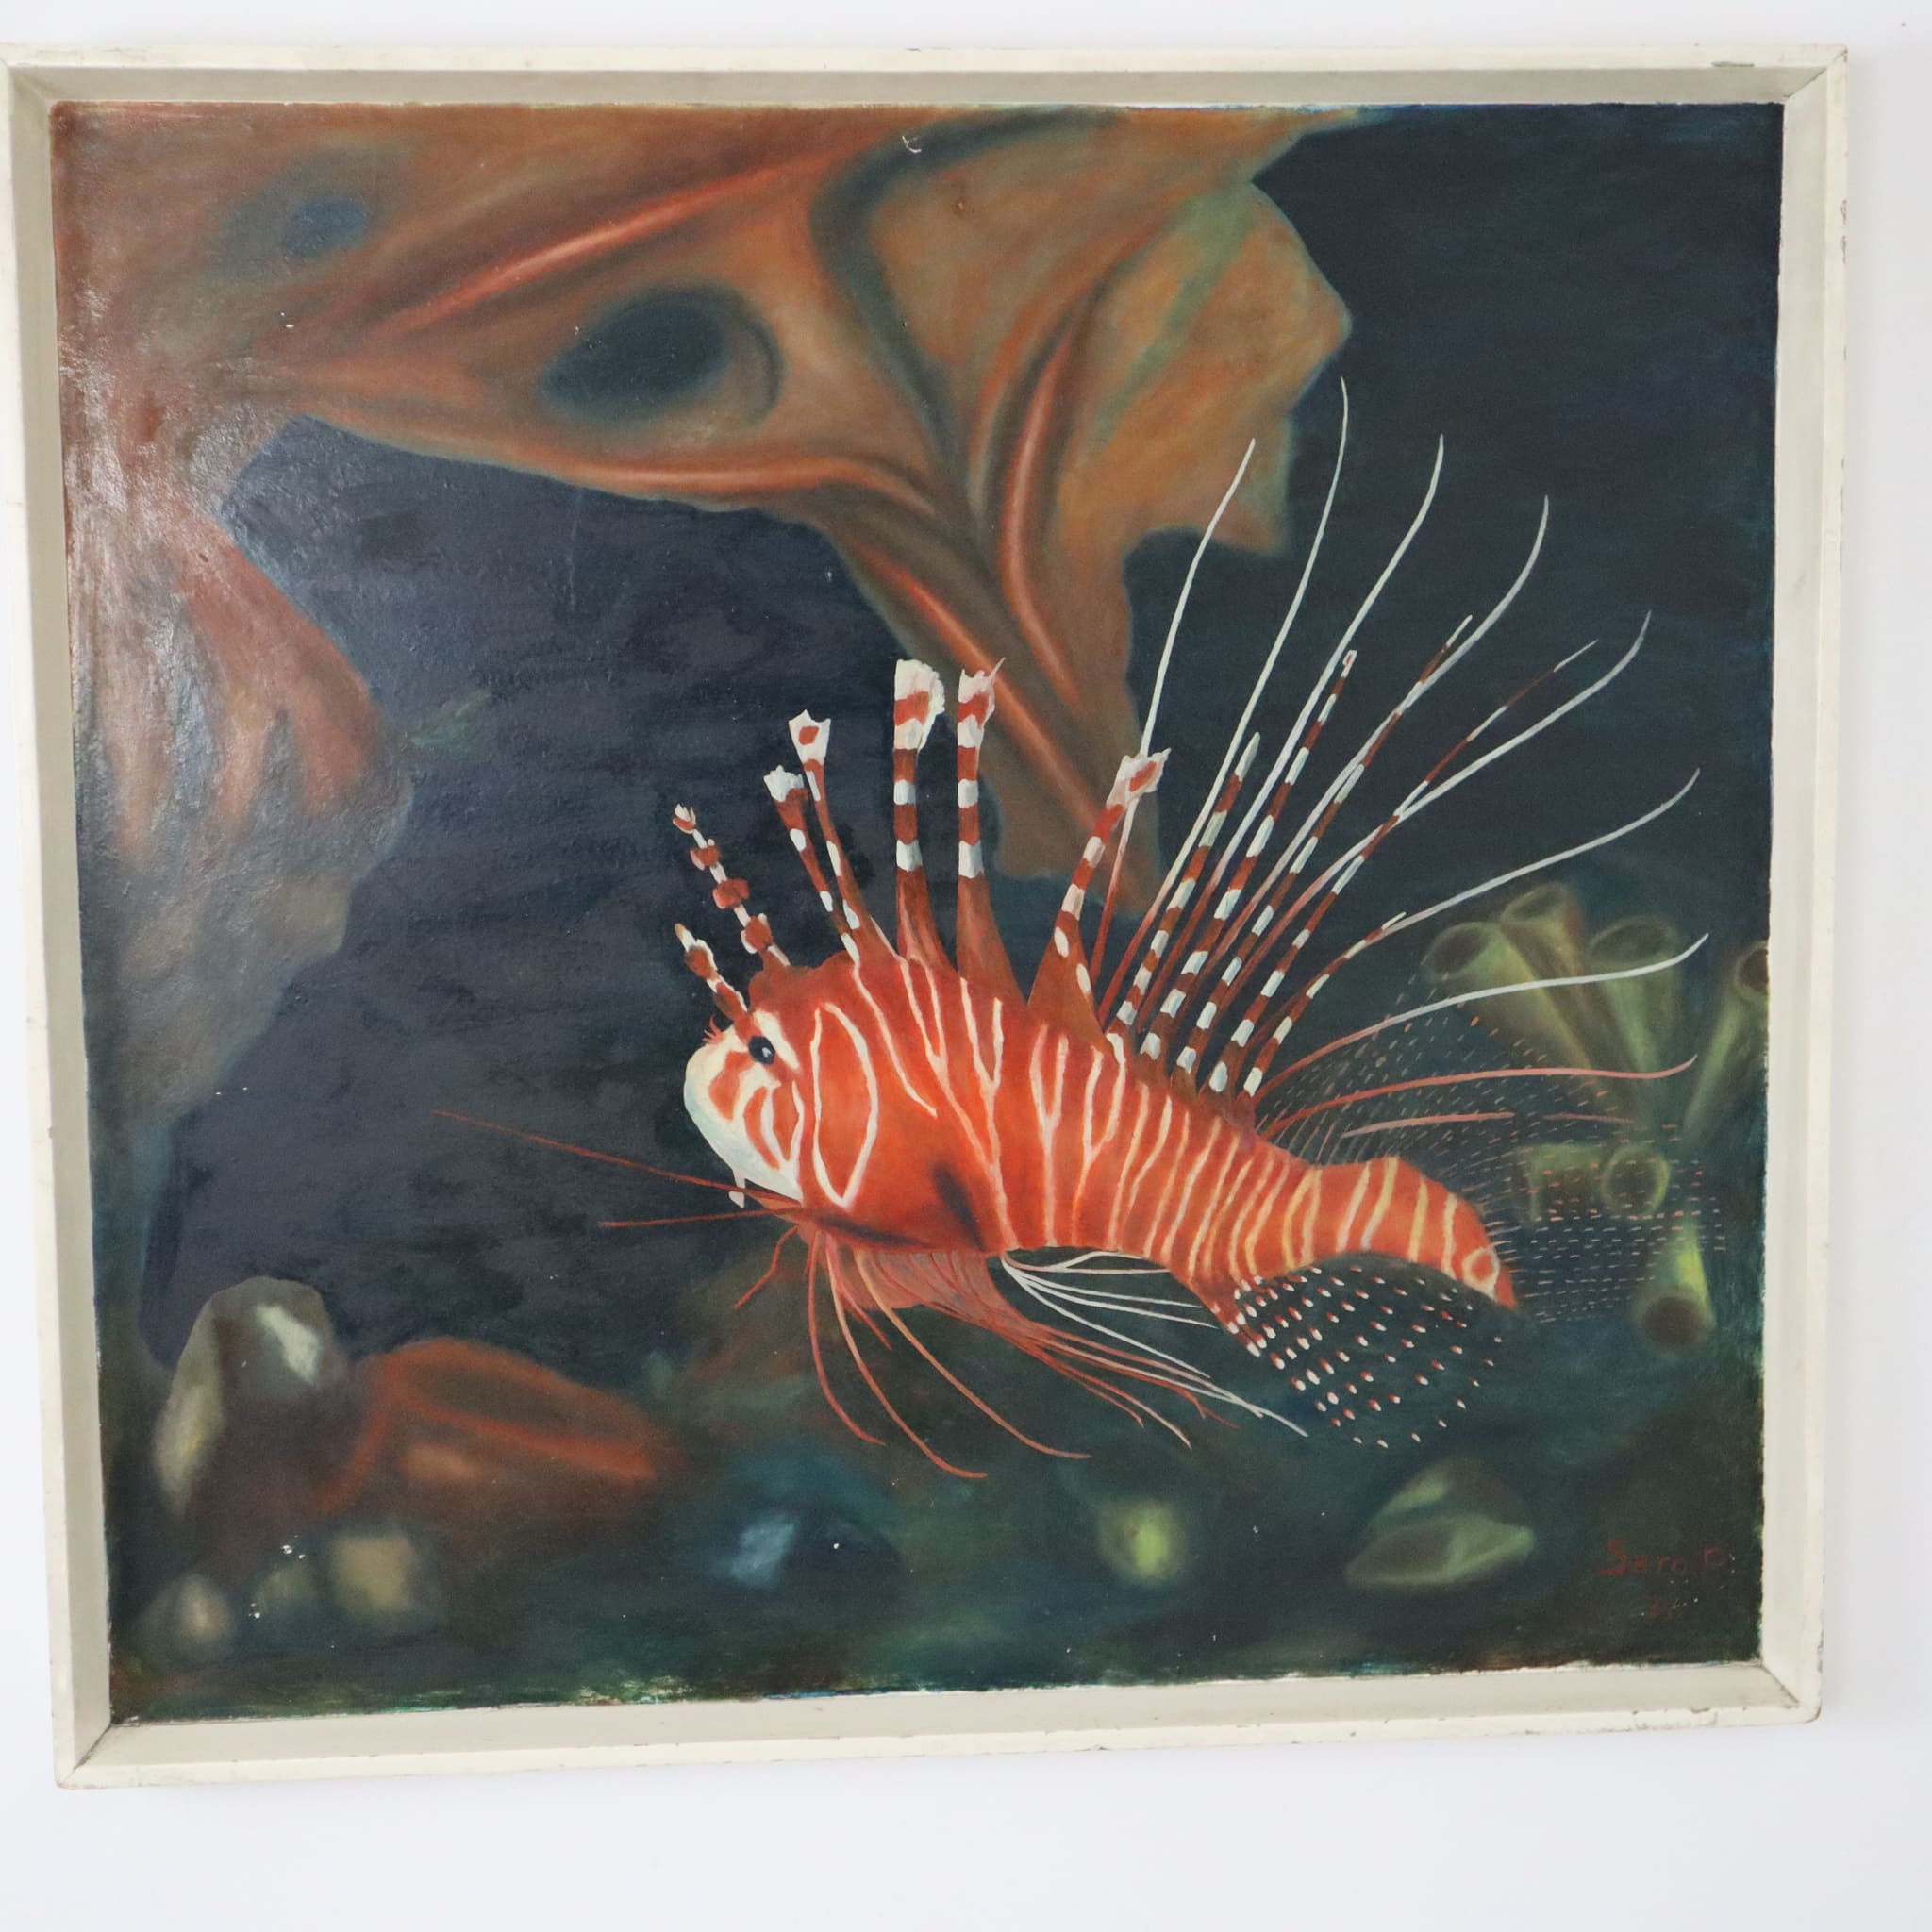 visionidepoca-modern-art-picture-depicting-fish-oil-on-masonite-70s-by-saro-p-made-in-italy